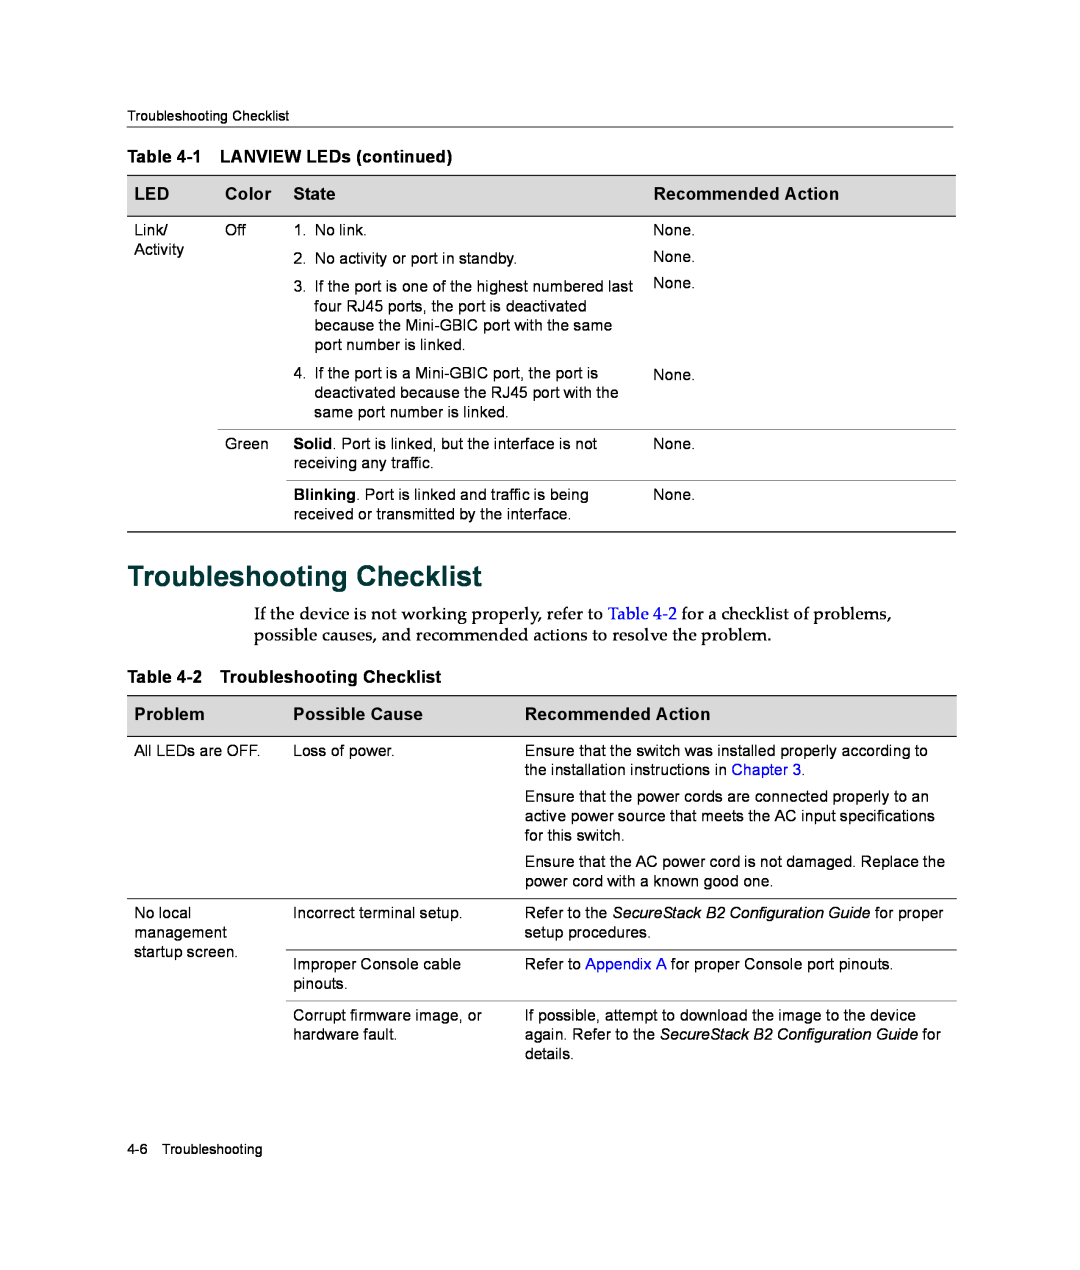 Enterasys Networks B2G124-24 manual Troubleshooting Checklist, Refer to the SecureStack B2 Configuration Guide for proper 